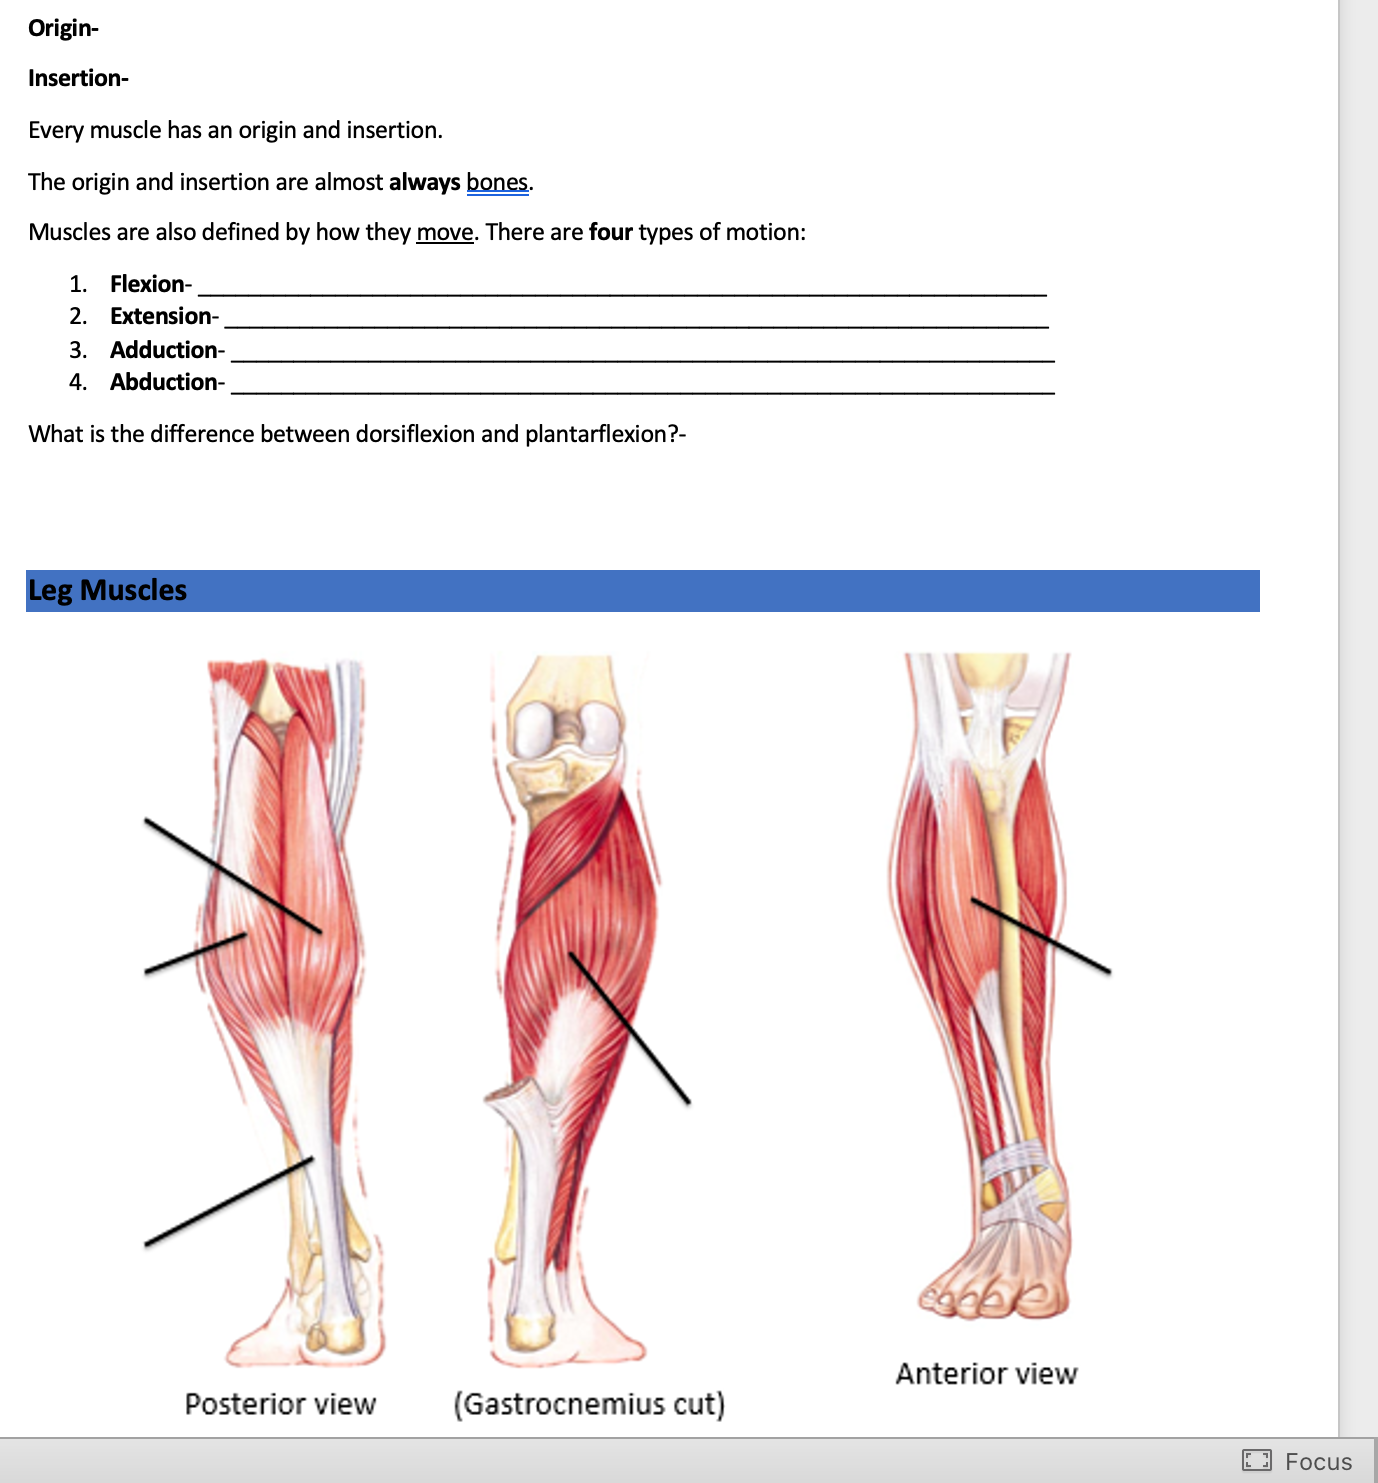 Which muscles are involved in flexion and extension of the leg?